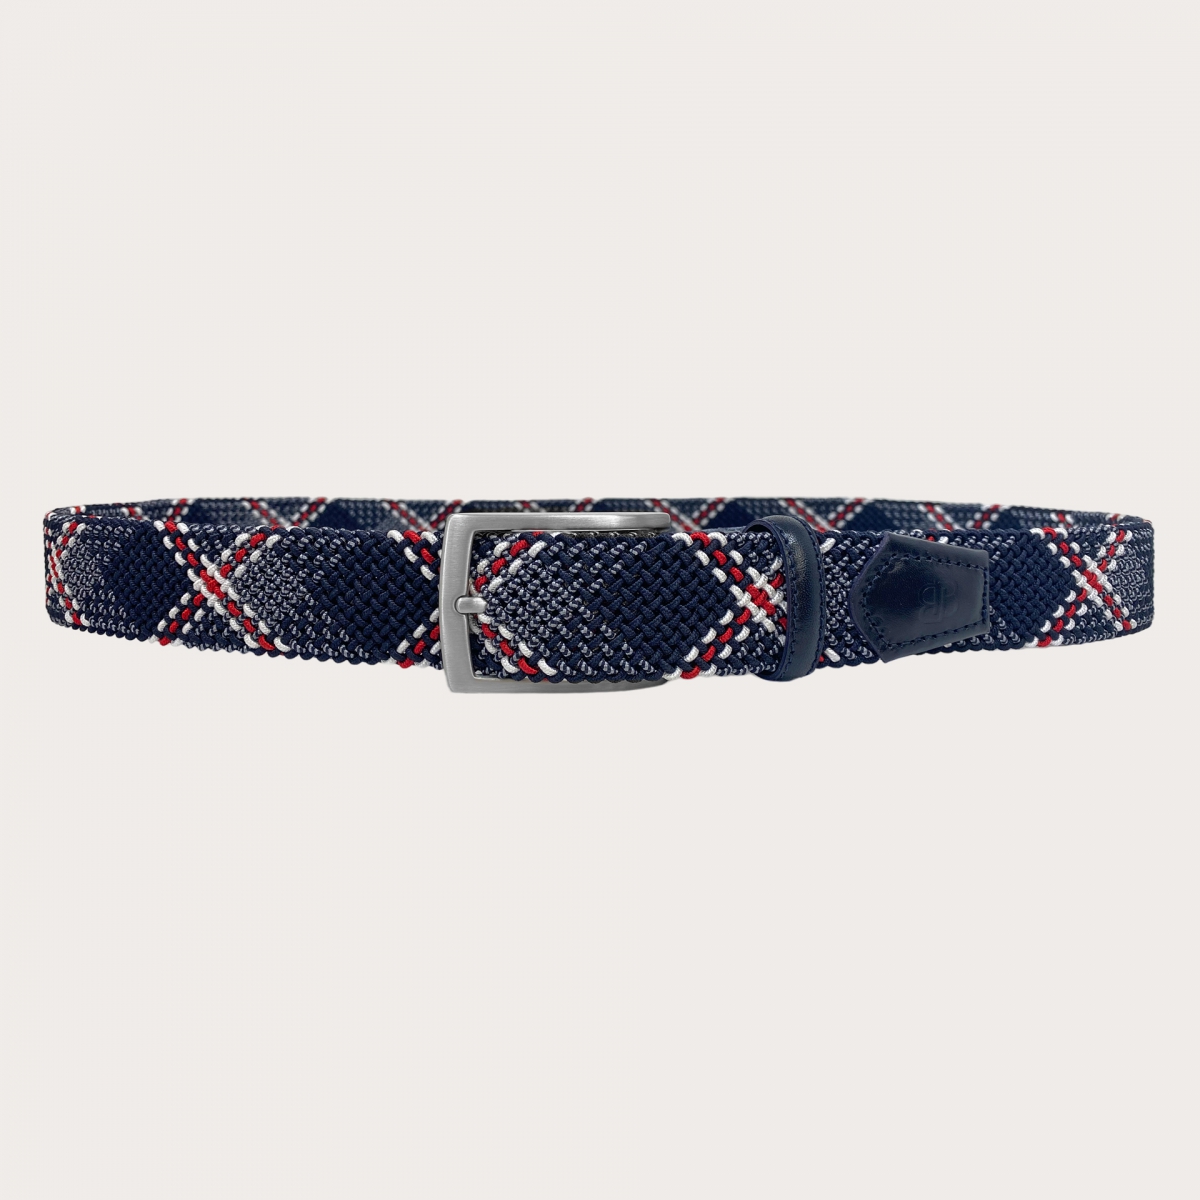 BRUCLE Braided elastic belt in blue with red and white pattern